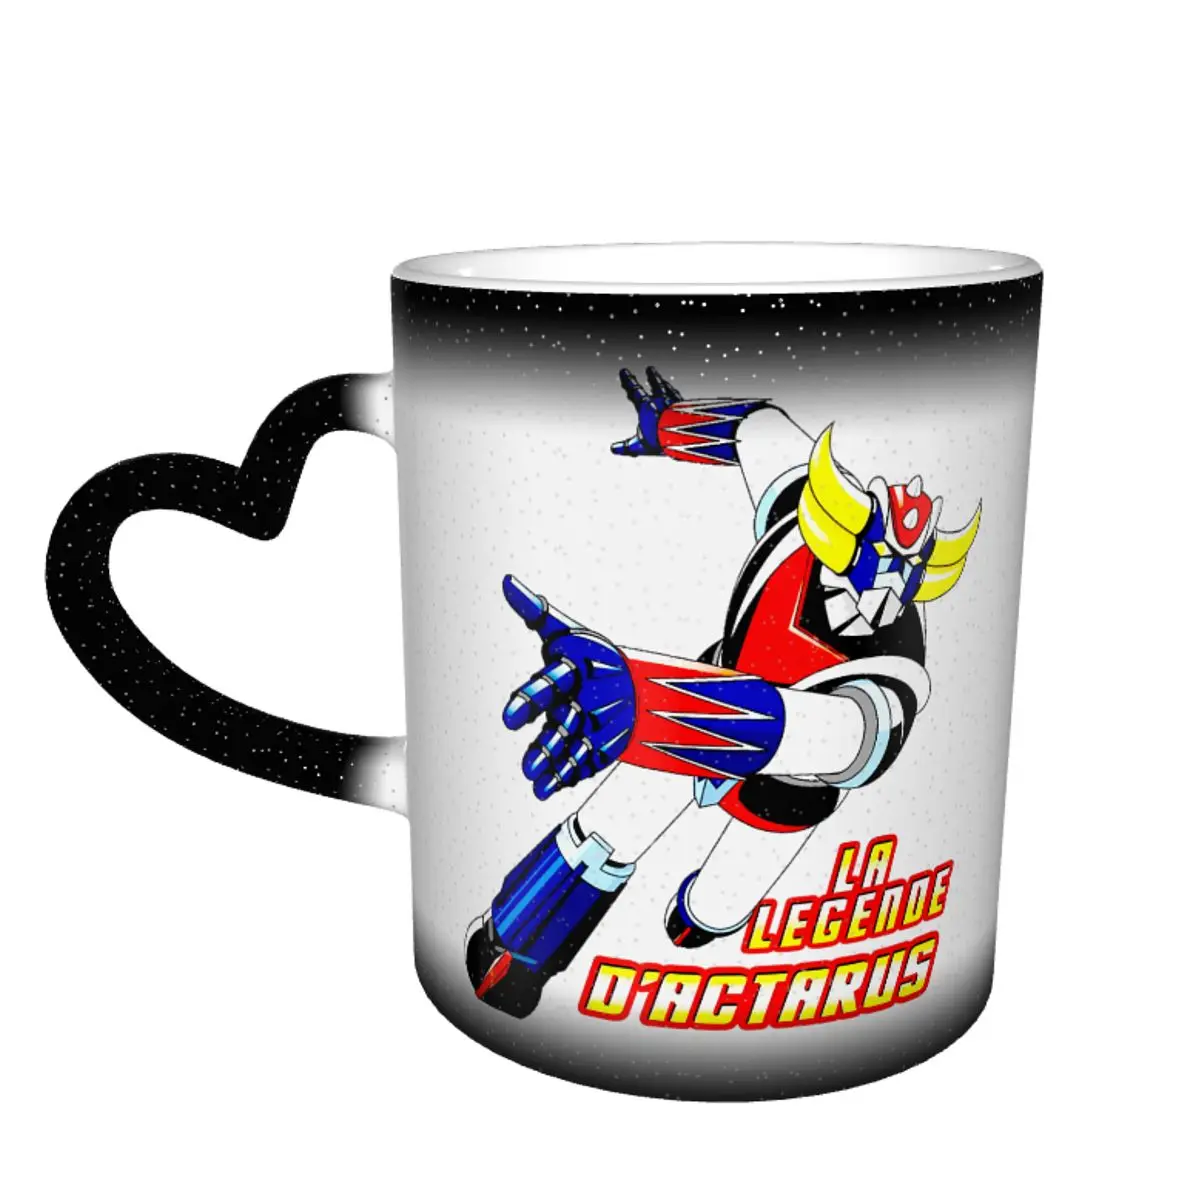 

Color Changing Mug in the Sky Goldoraks (2) Graphic Vintage R348 Ceramic Heat-sensitive Cup Graphic Multi-function cups